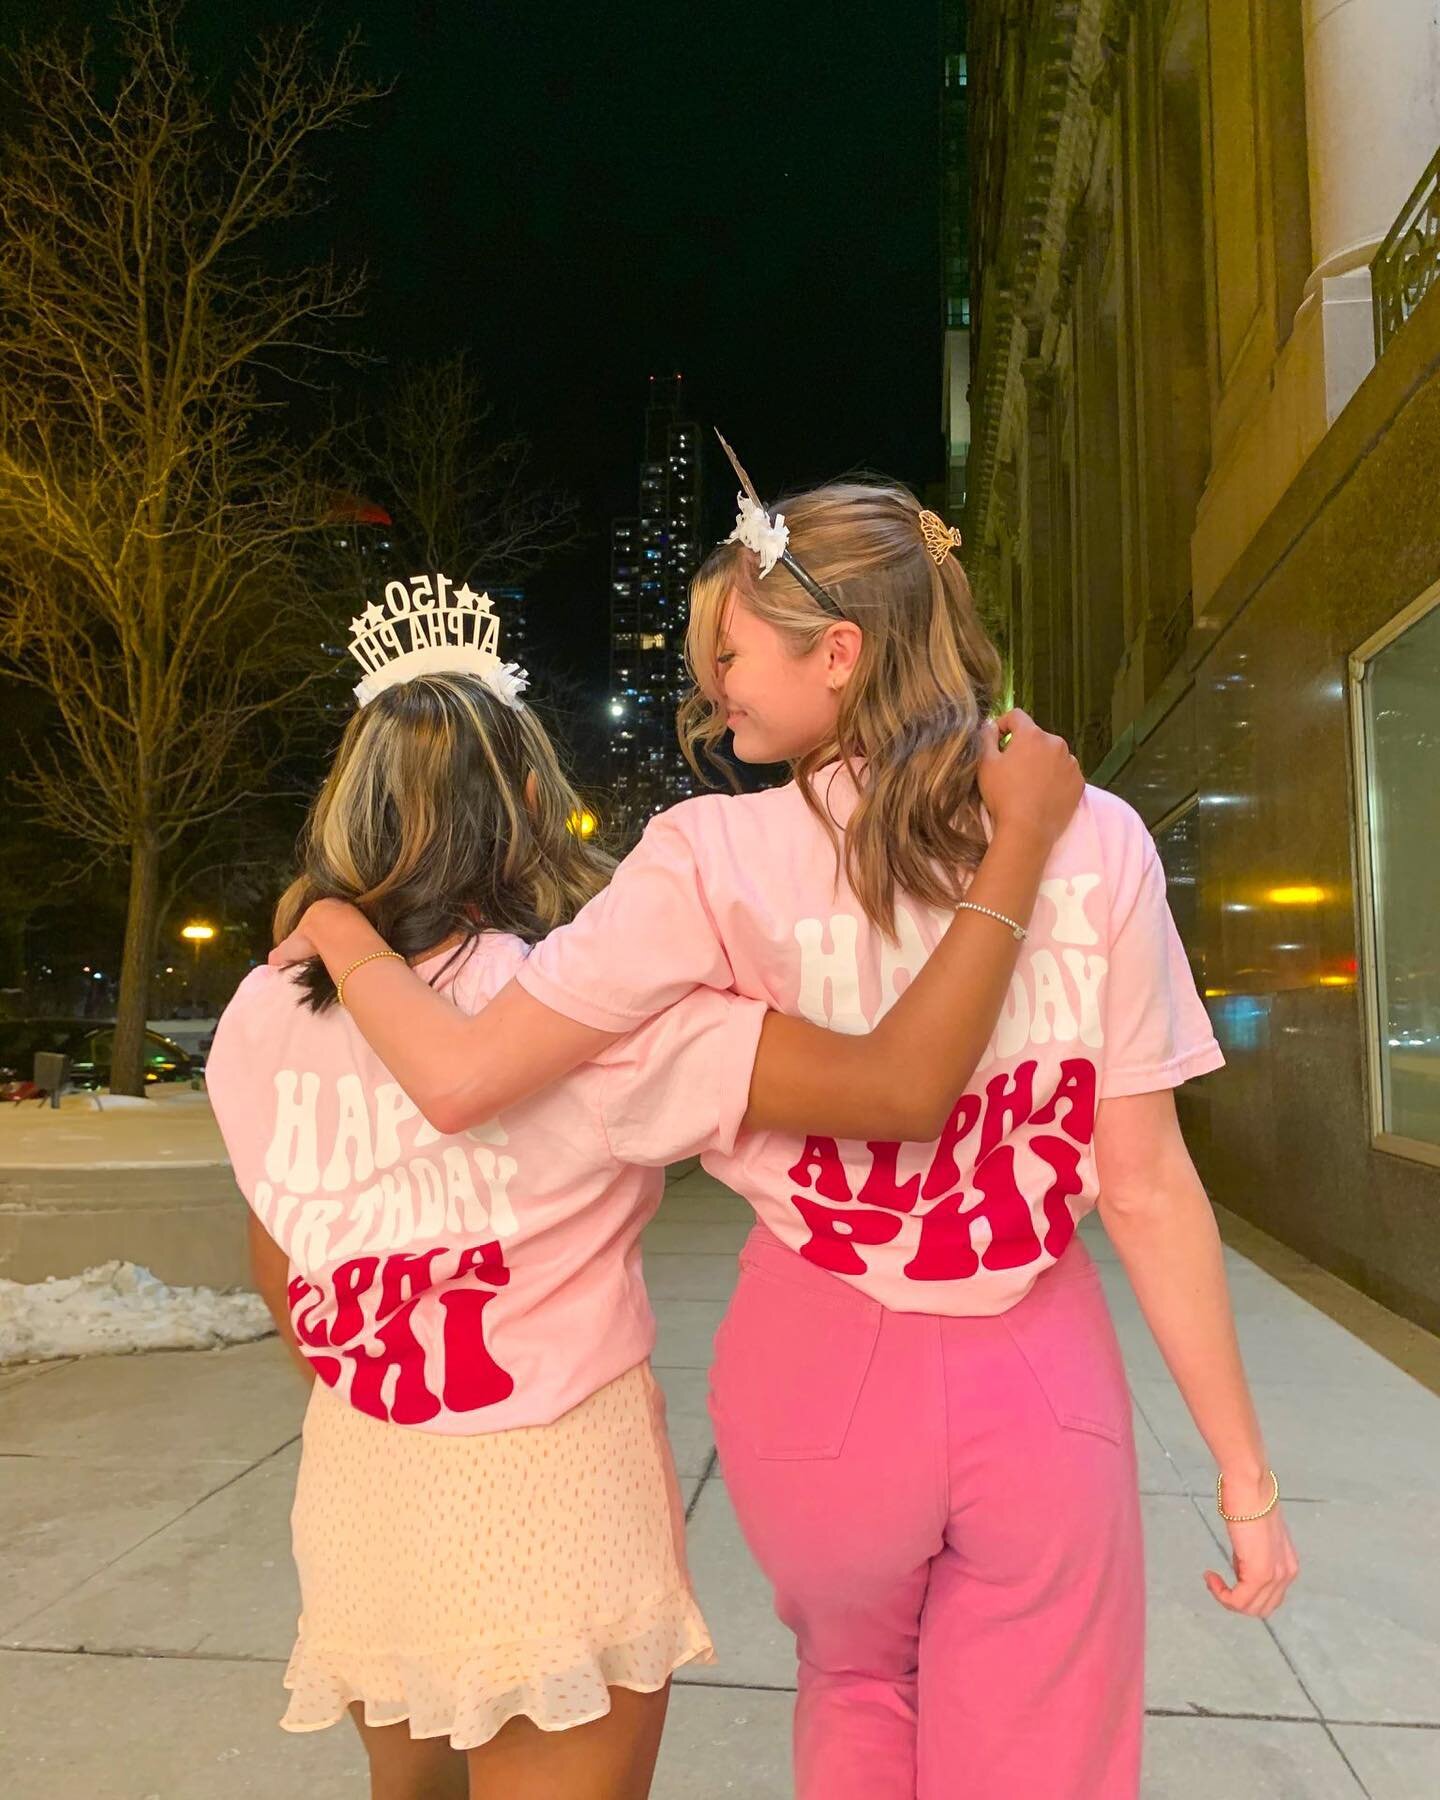 Happy 150th Birthday, Alpha Phi!🎂🫧💖
Today marks 150 years of Alpha Phi empowering and inspiring women across the world. What began with 10 founding members now serves 270,000 members and 173 collegiate chapters! The Beta Omega chapter is so gratef